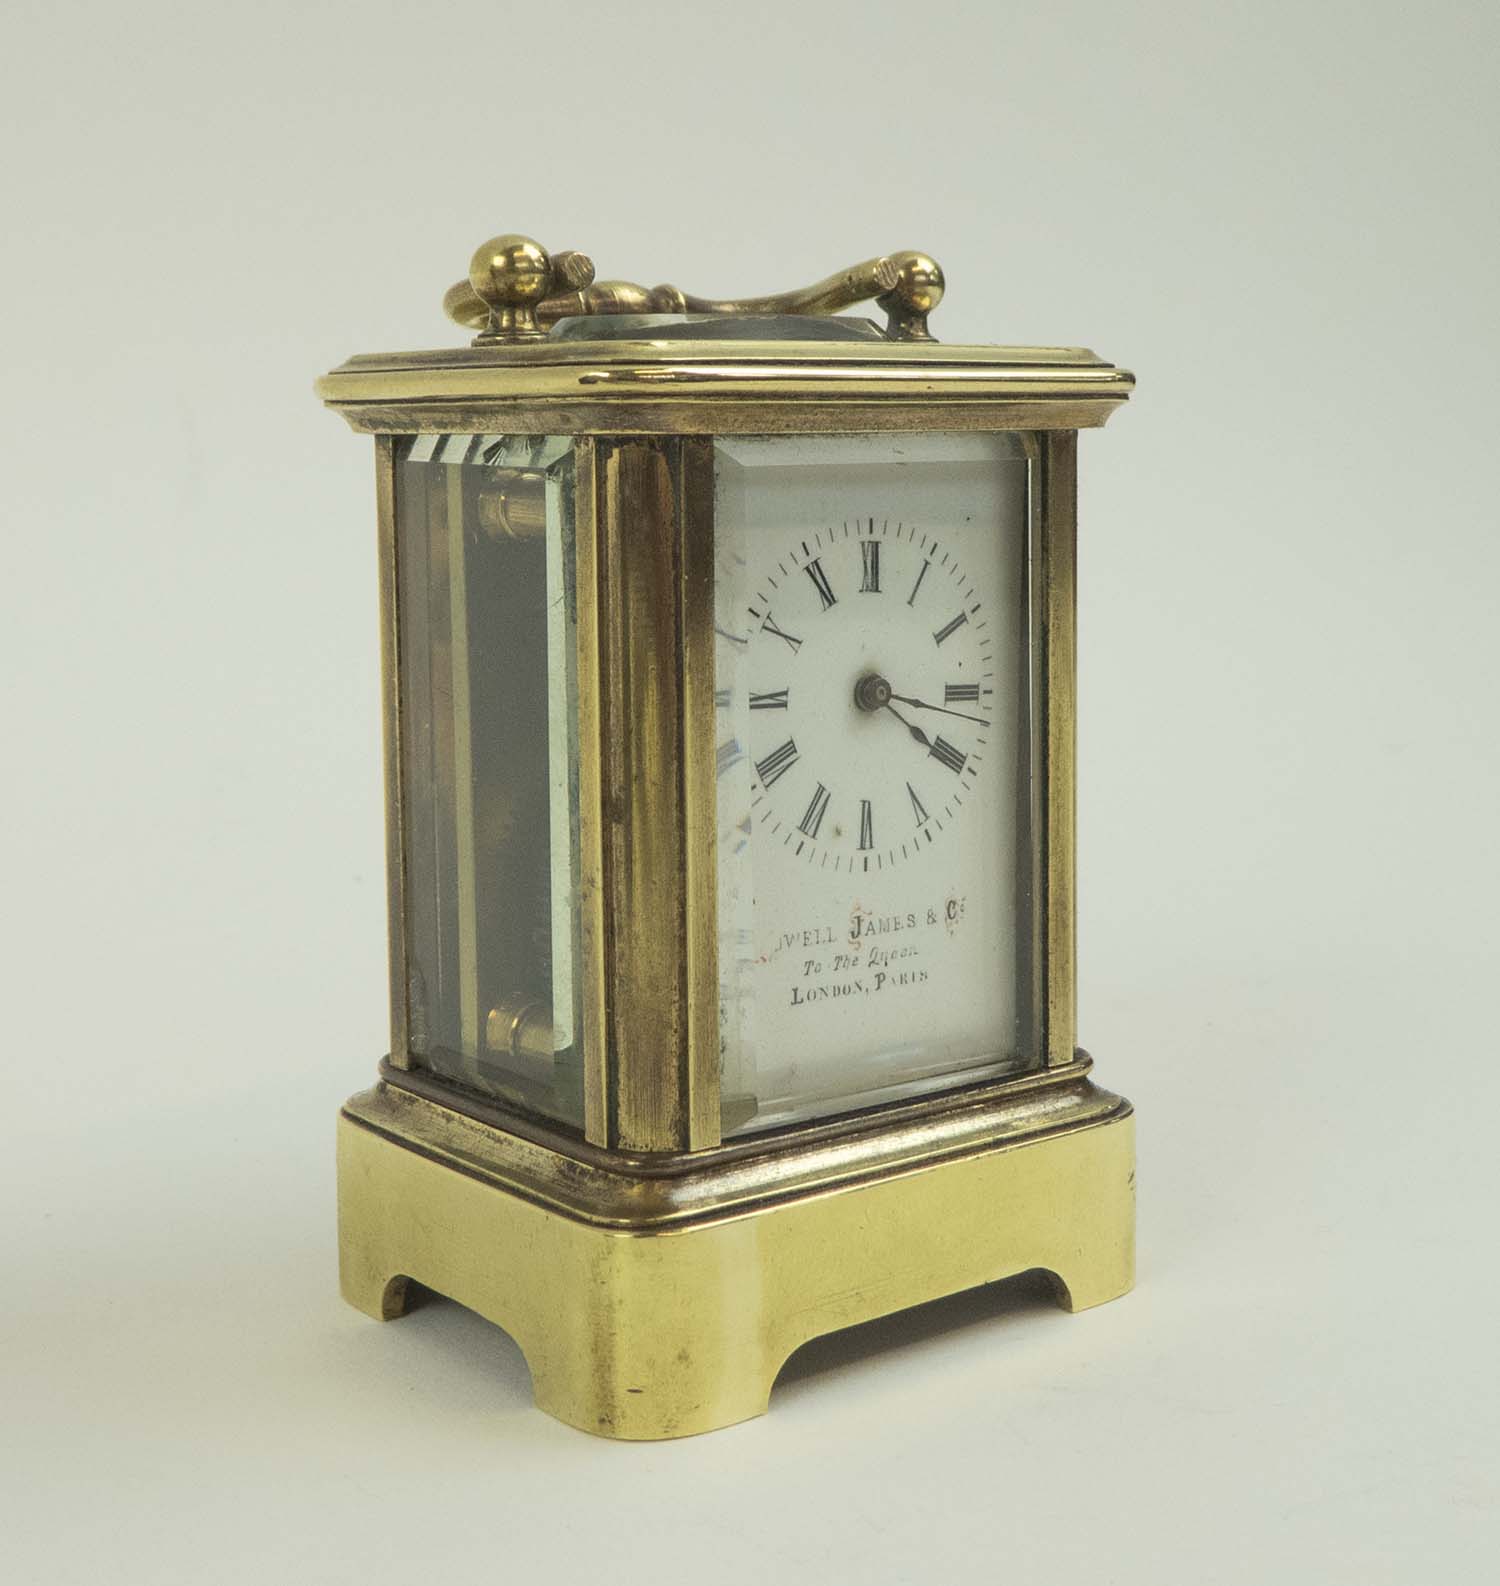 MINIATURE HOWELL JAMES & CO. CARRIAGE CLOCK, with brass case, French movement, 4.5cm W x 4cm D x 6.